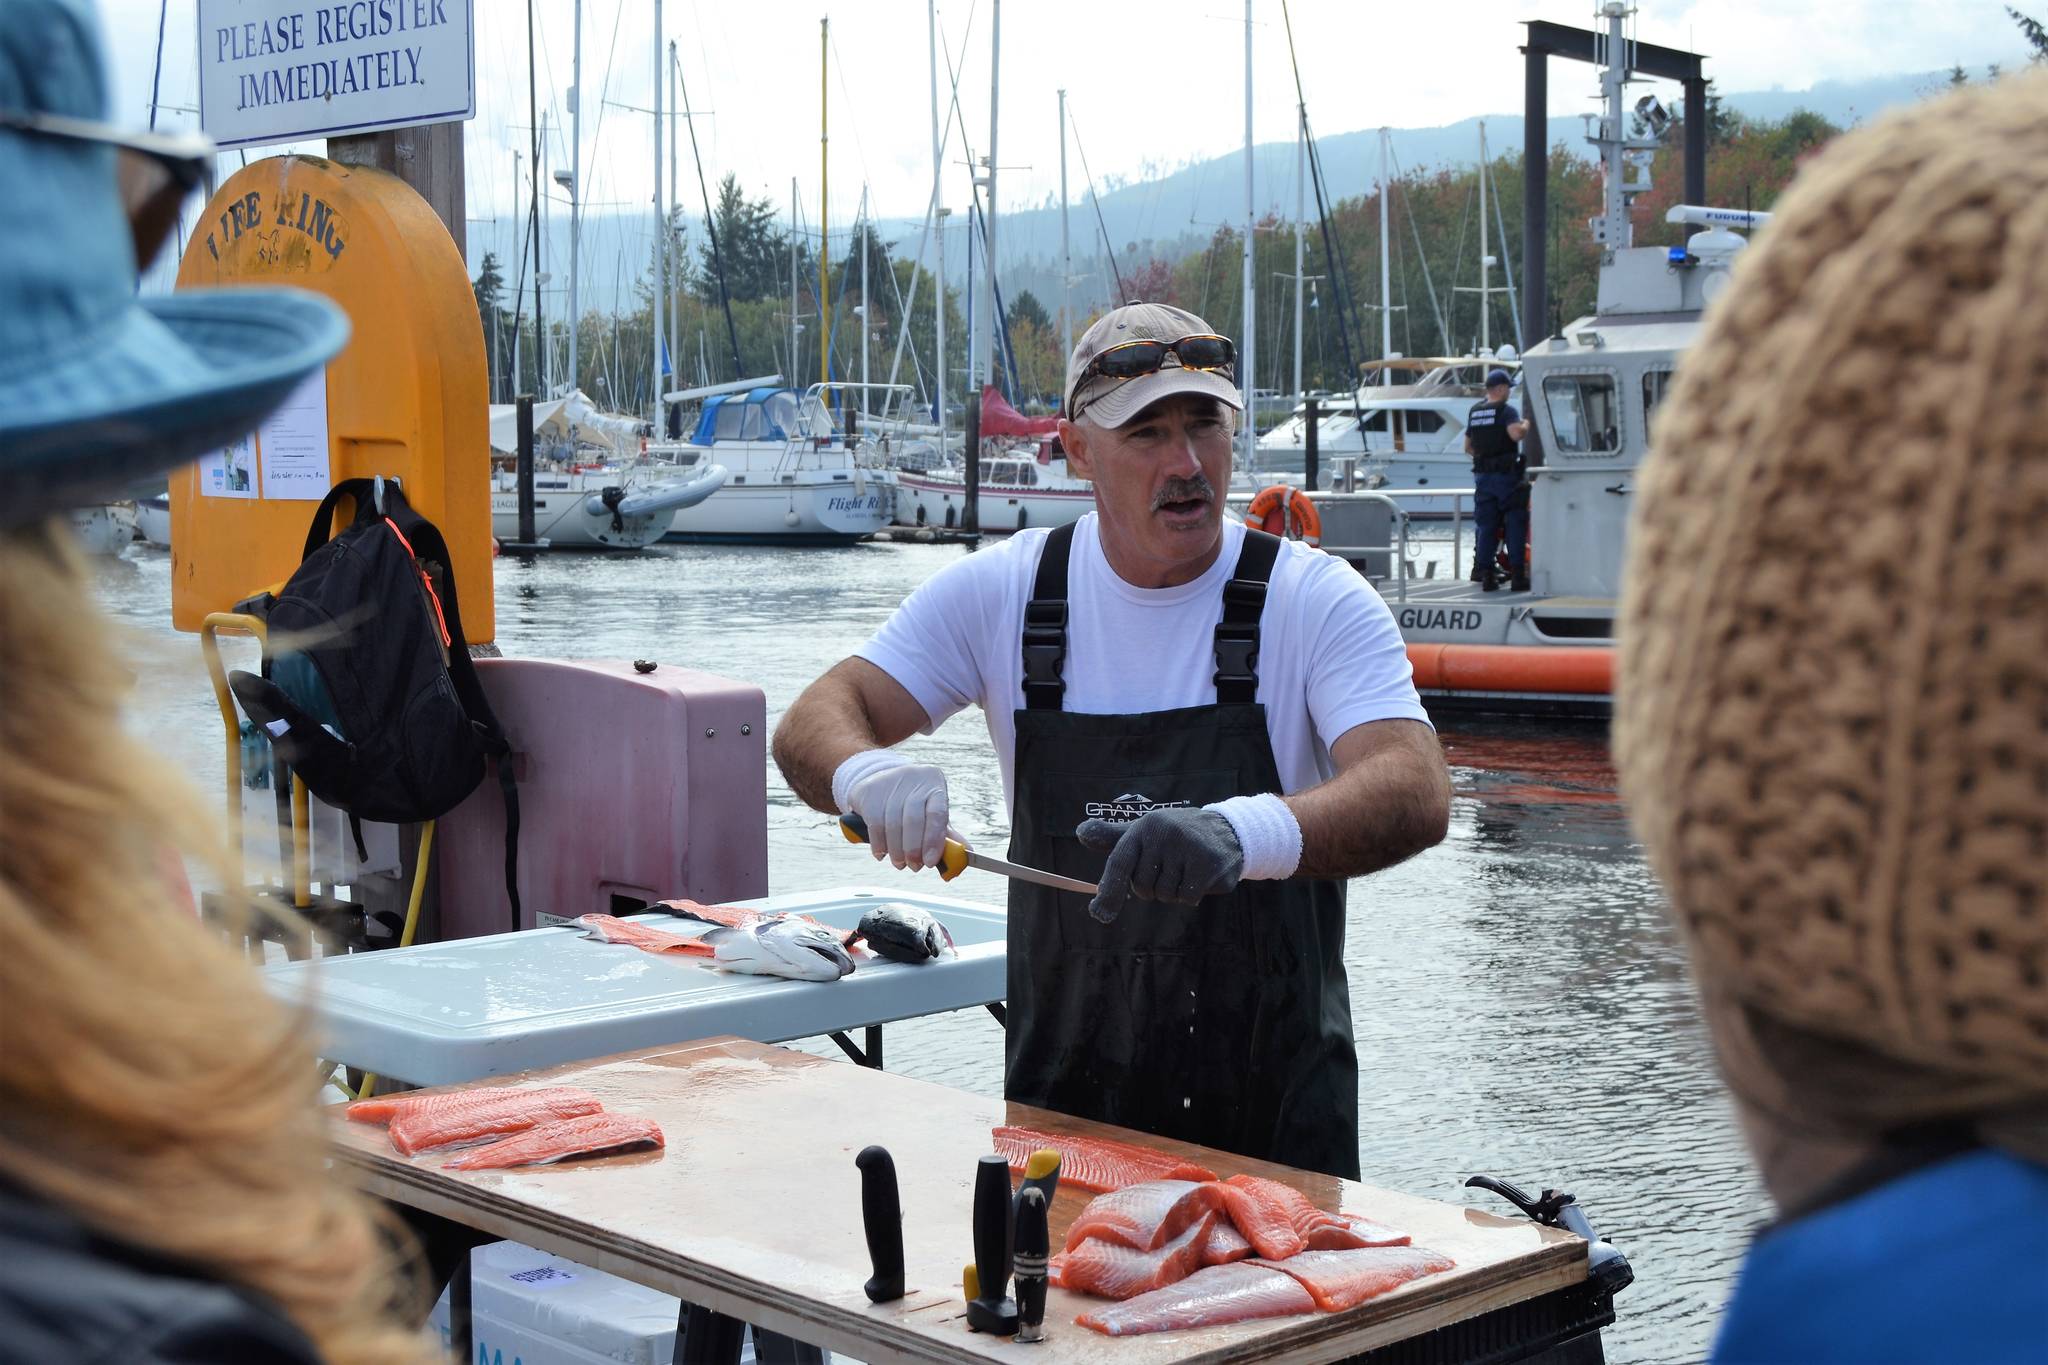 Chris Jafay of “Dun Rite” fish filleting shows a small crowd his work on the docks at the John Wayne Marina during Waterfront Day on Sept. 15. Sequim Gazette photo by Matthew Nash